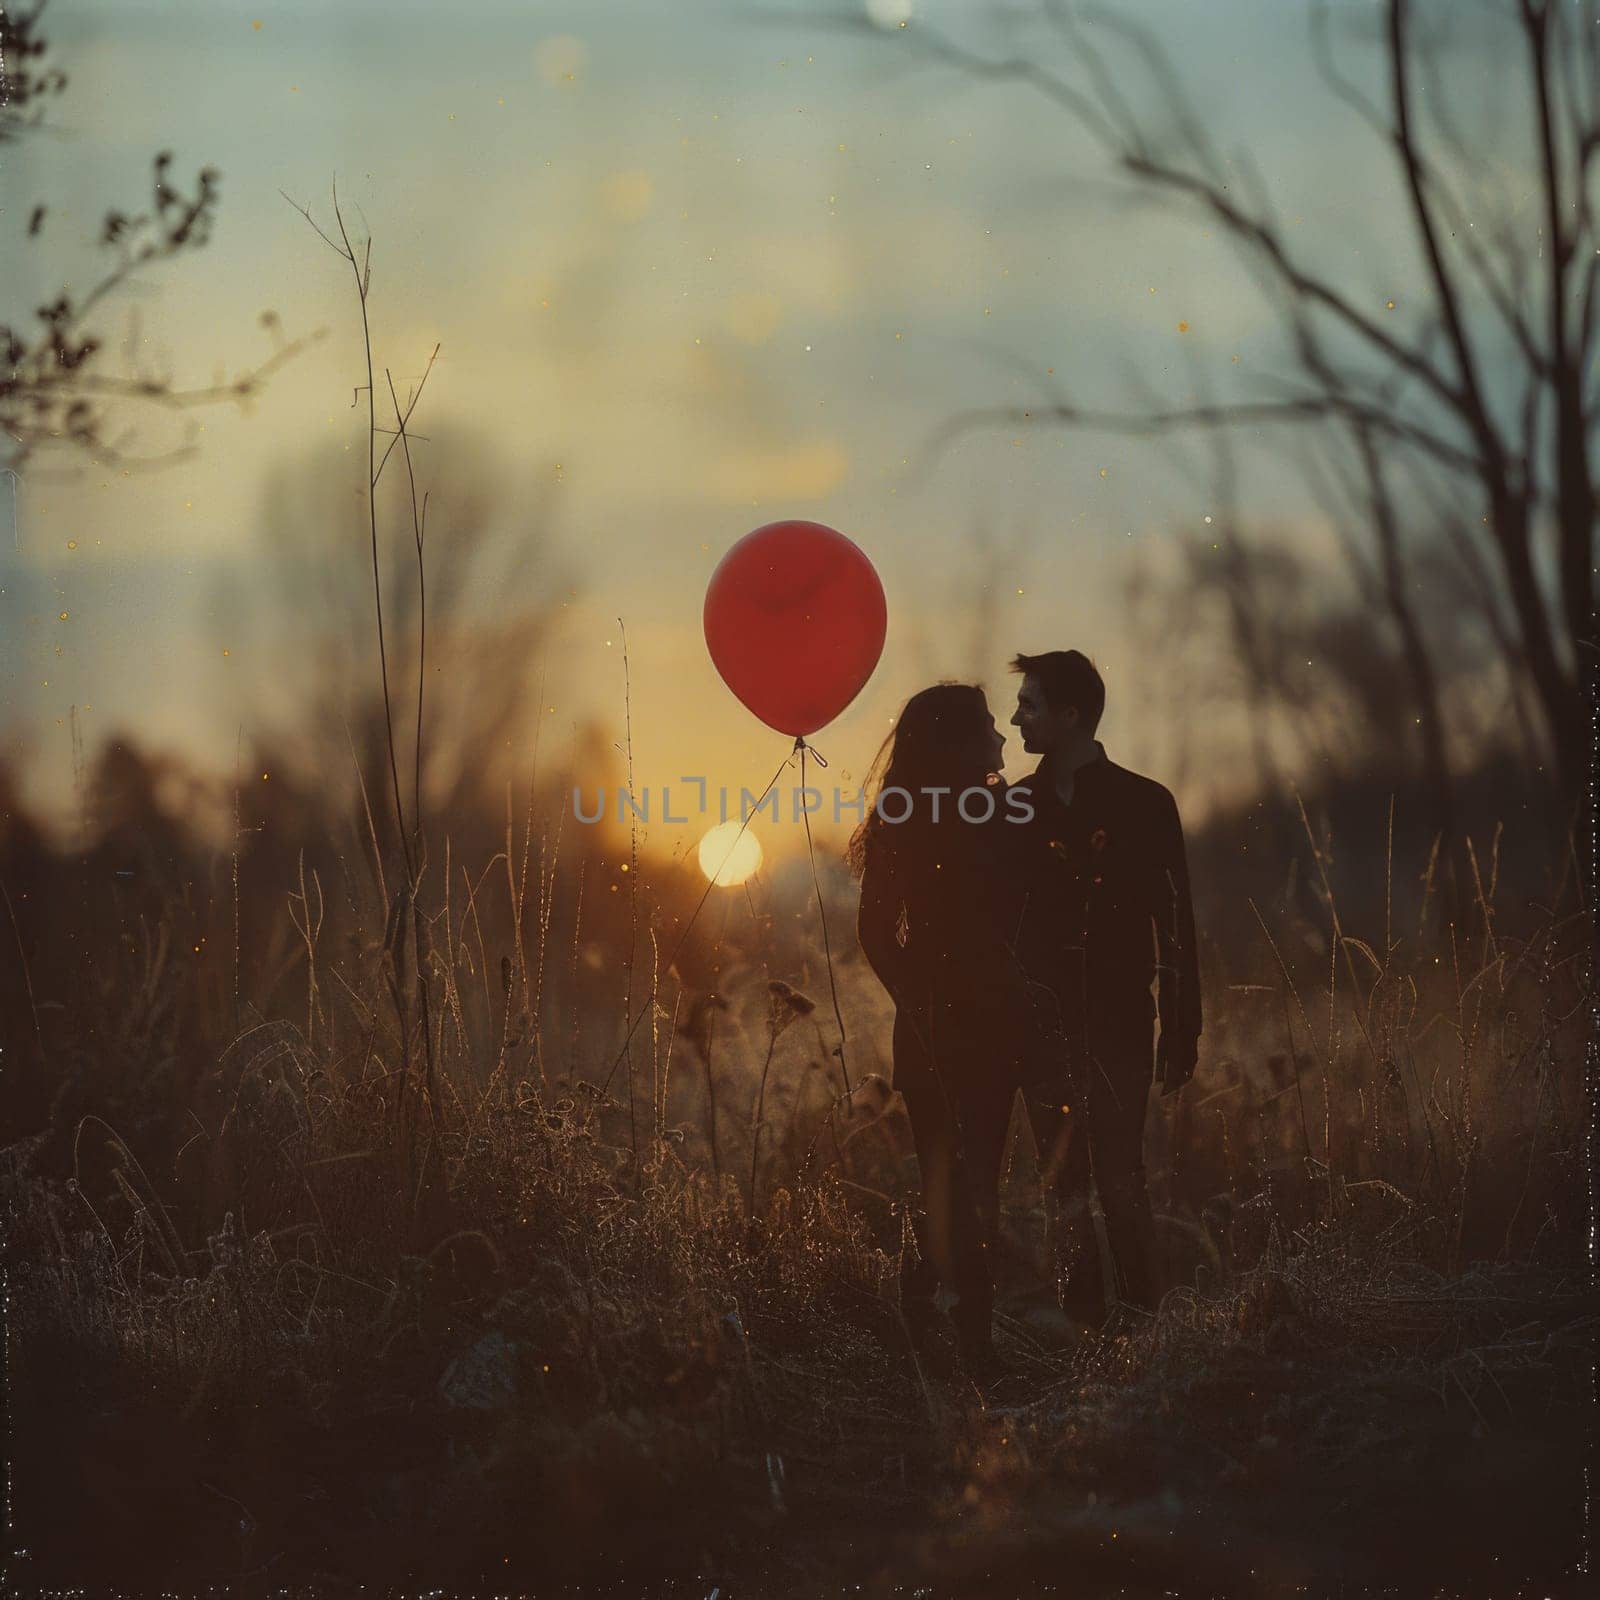 A man and woman standing in a field holding a red balloon together.